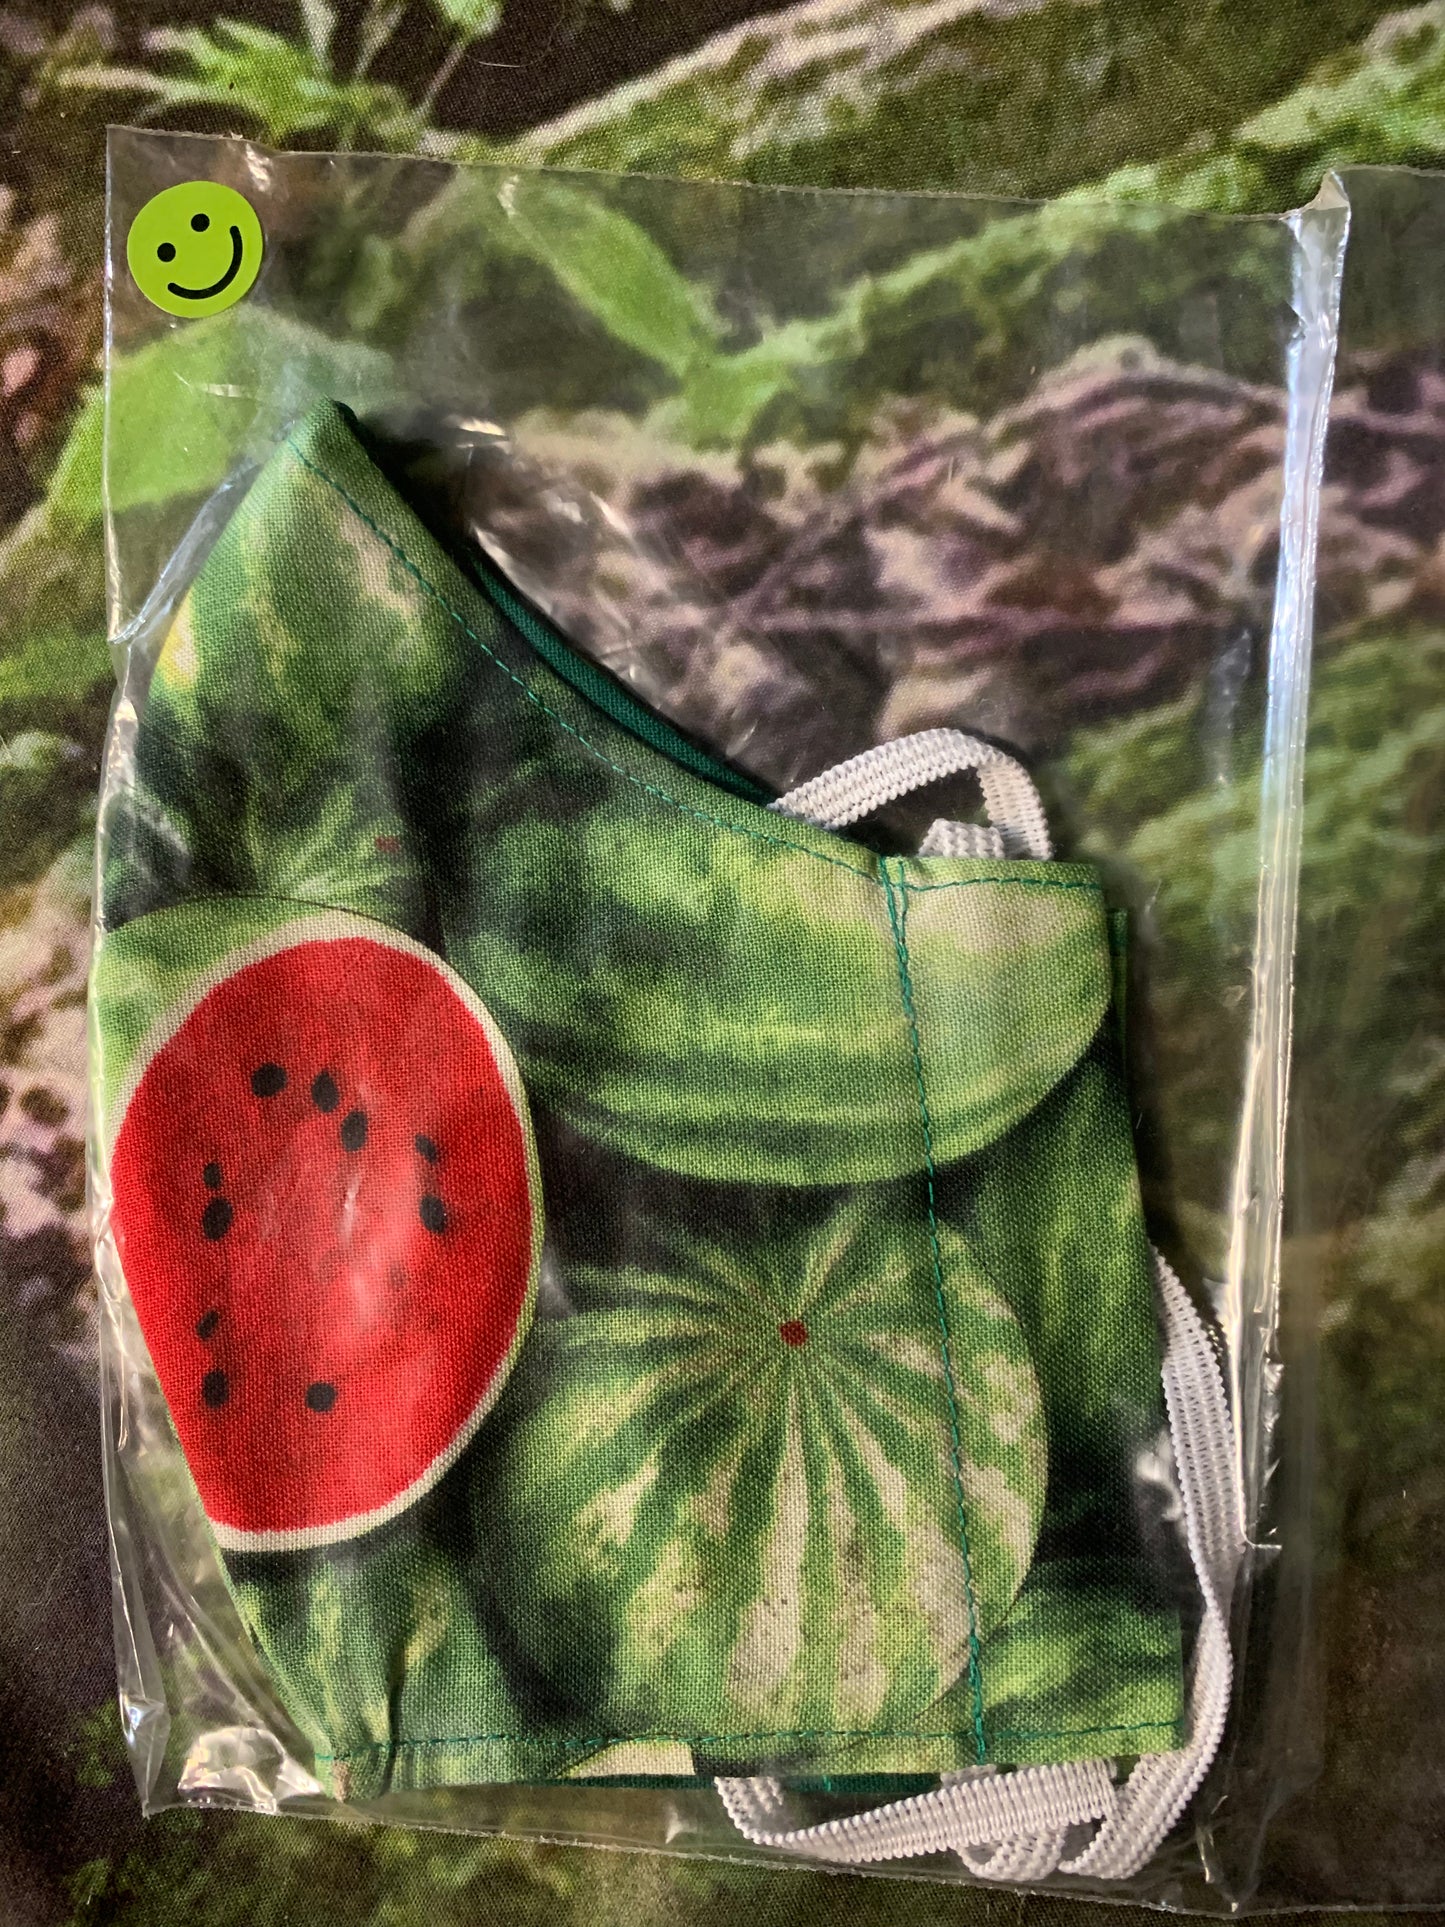 Watermelons